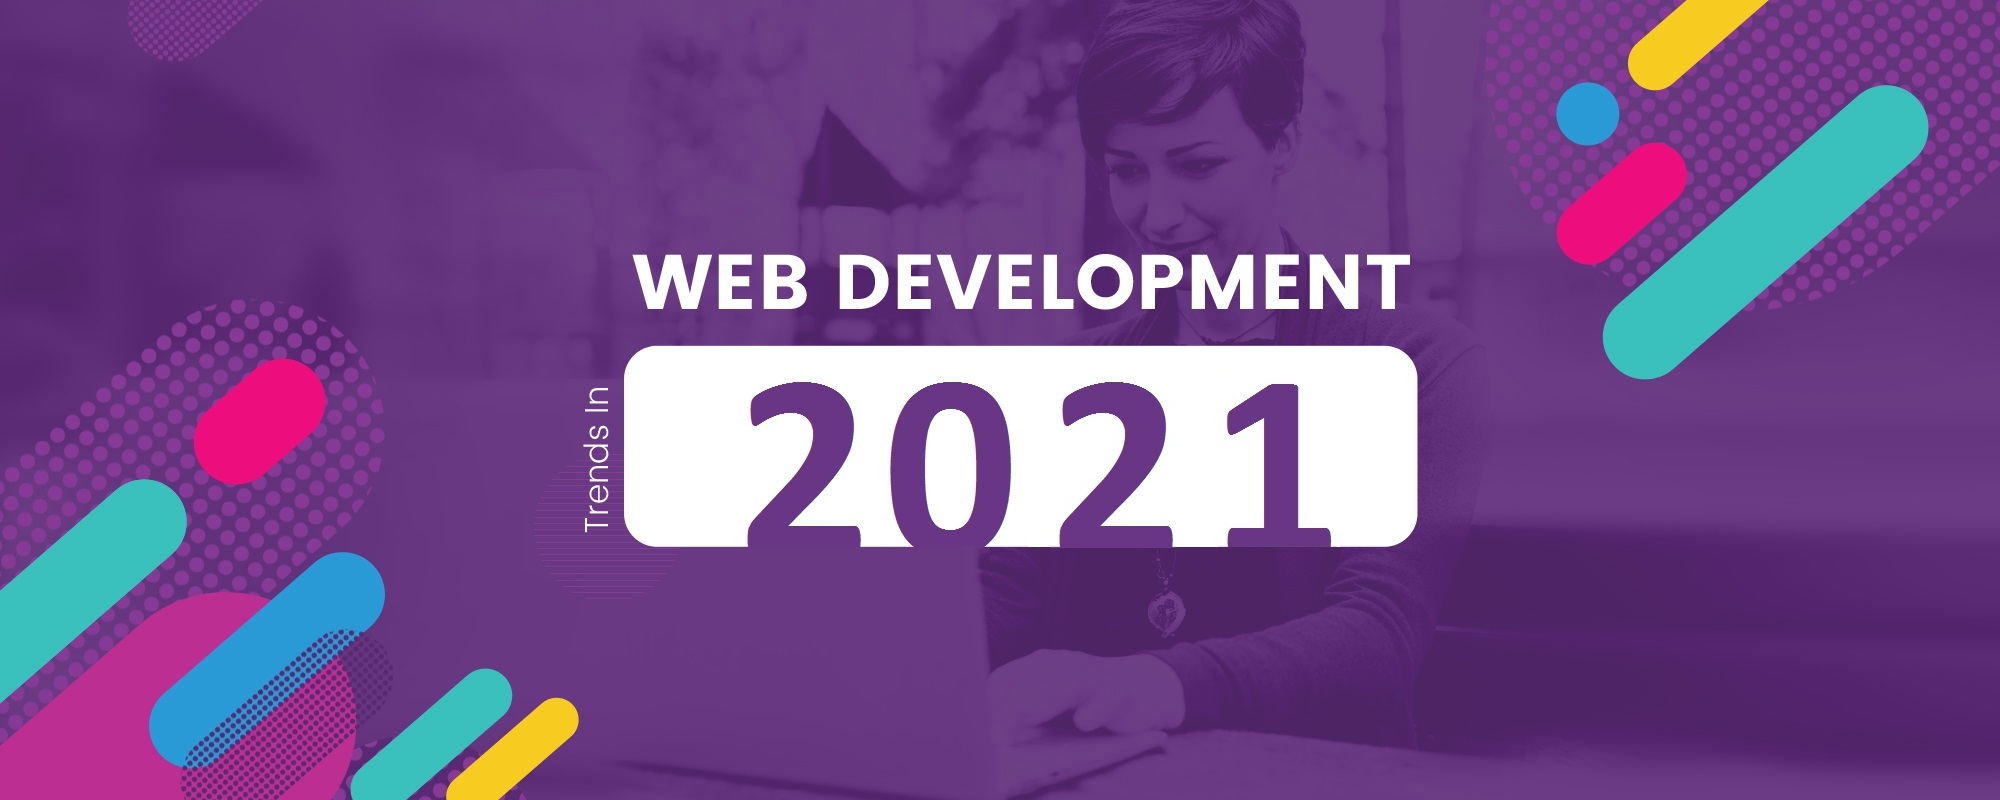 15 Web Design & Development Trends To Watch Out For In 2021